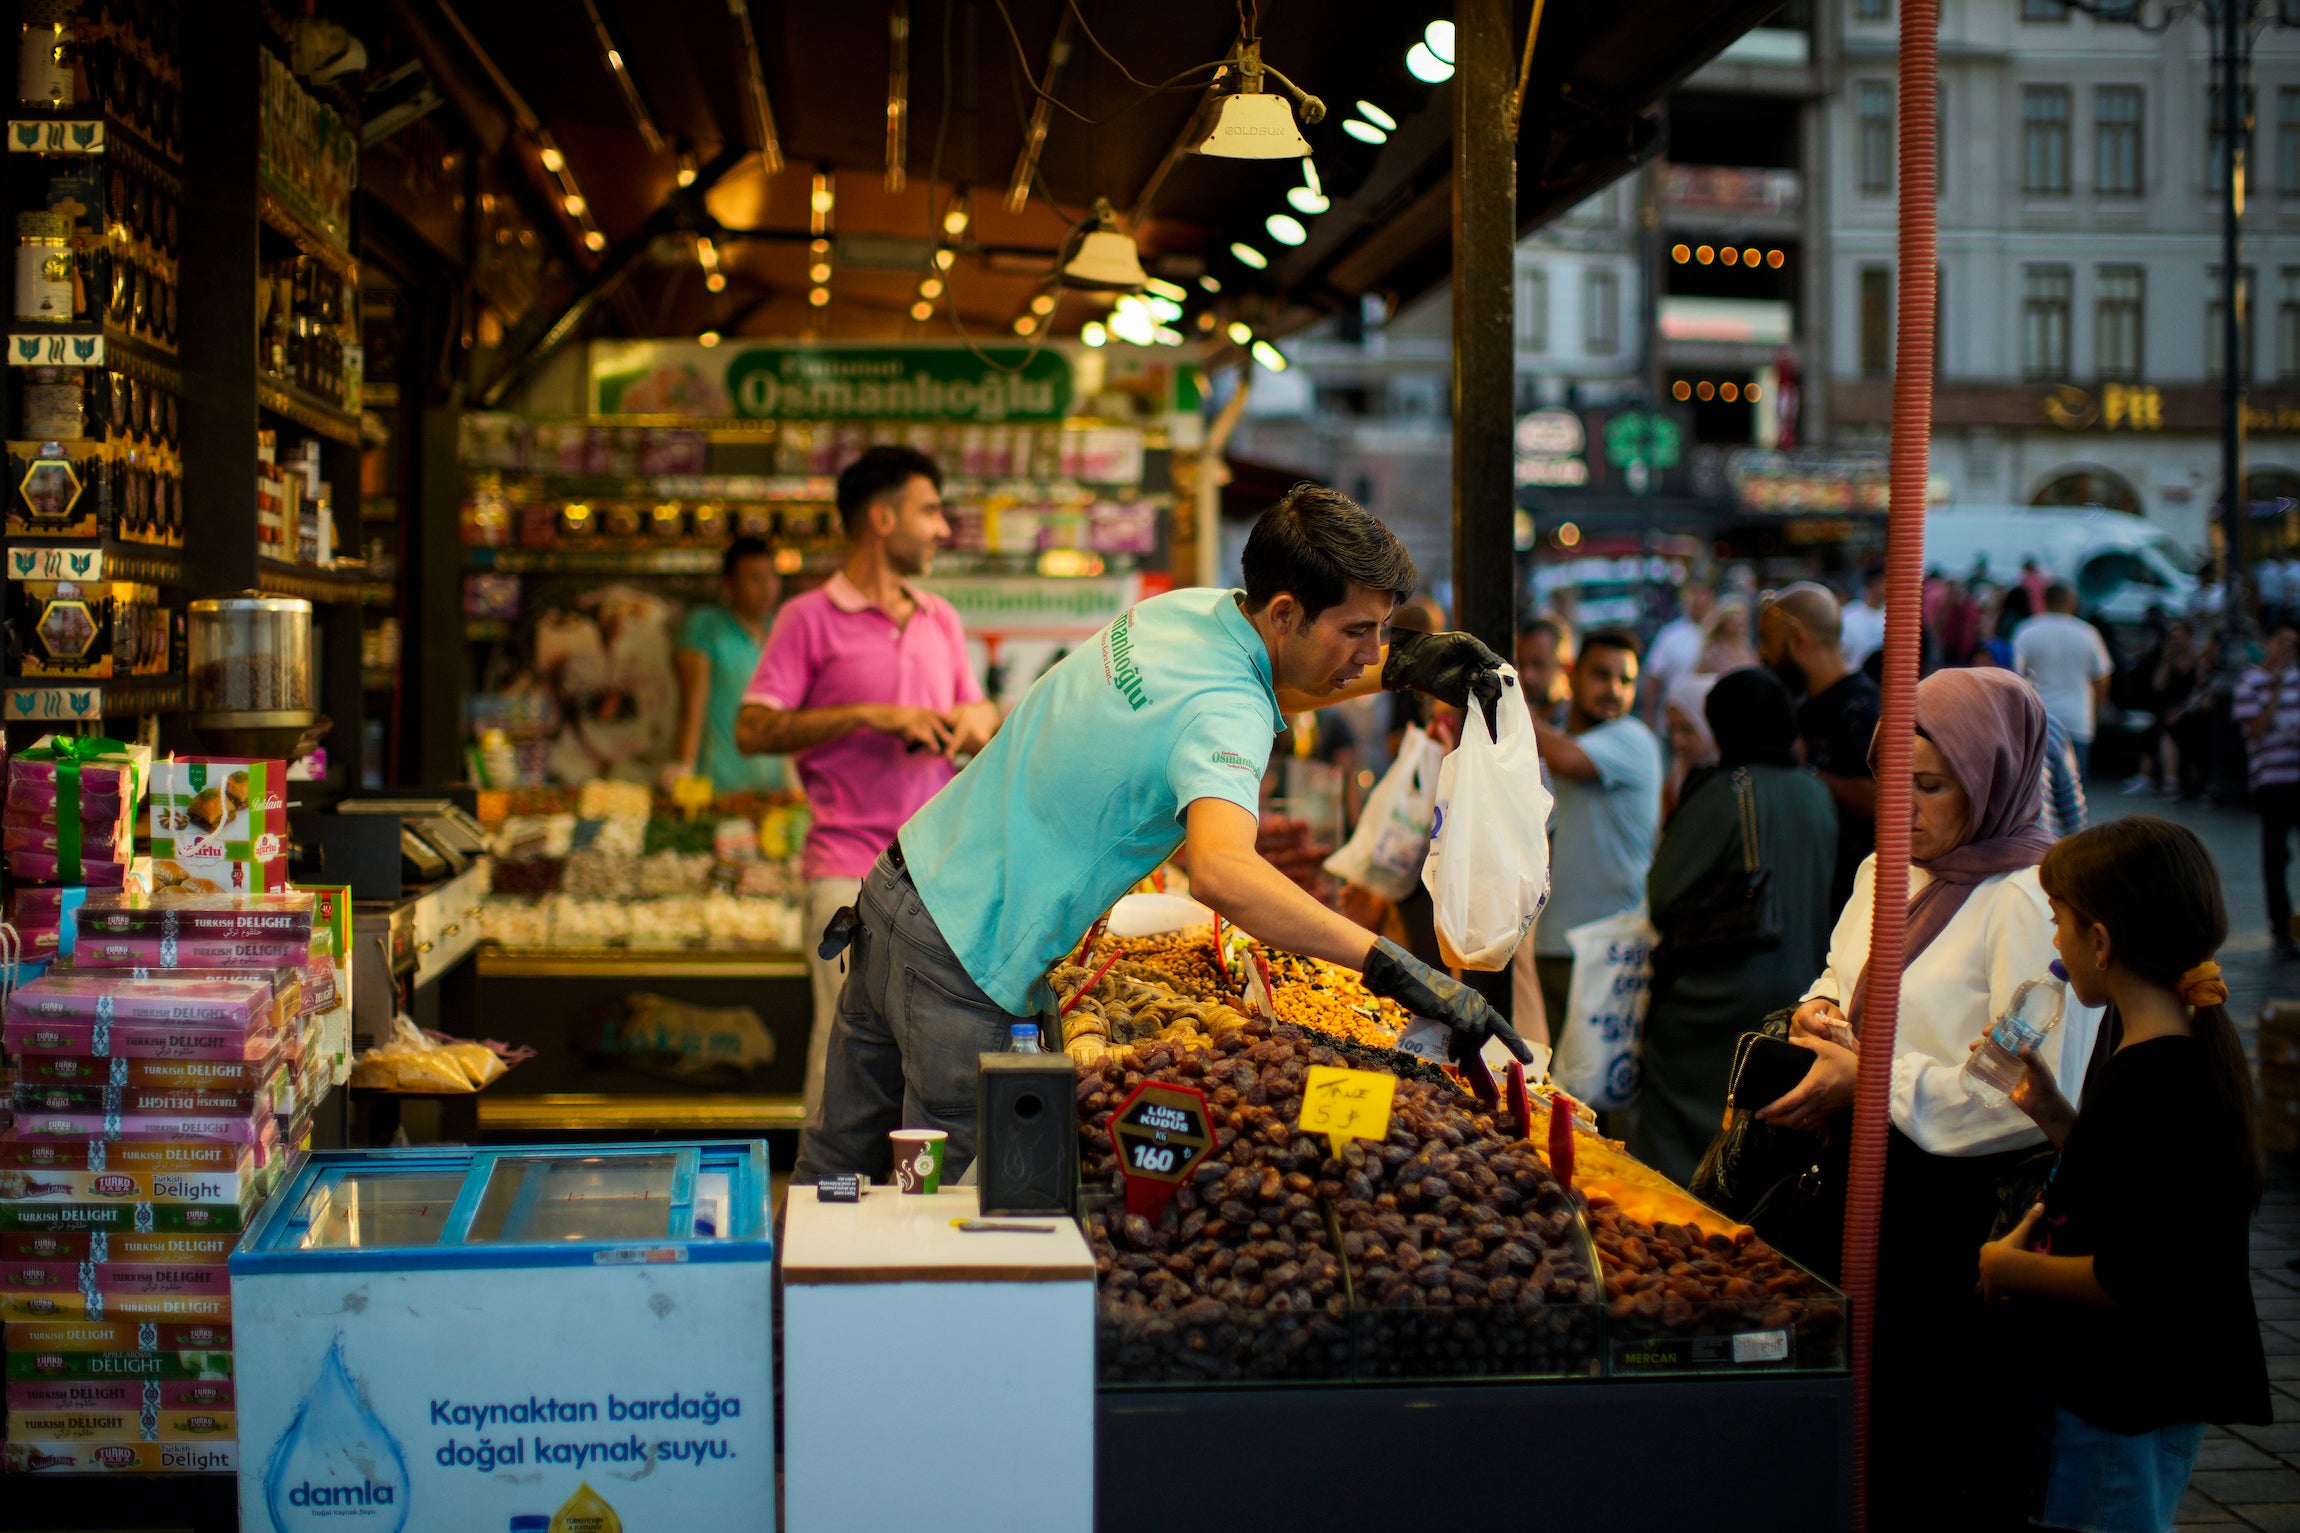 A clerk talks to a customer at the Egyptian spices market in Istanbul.